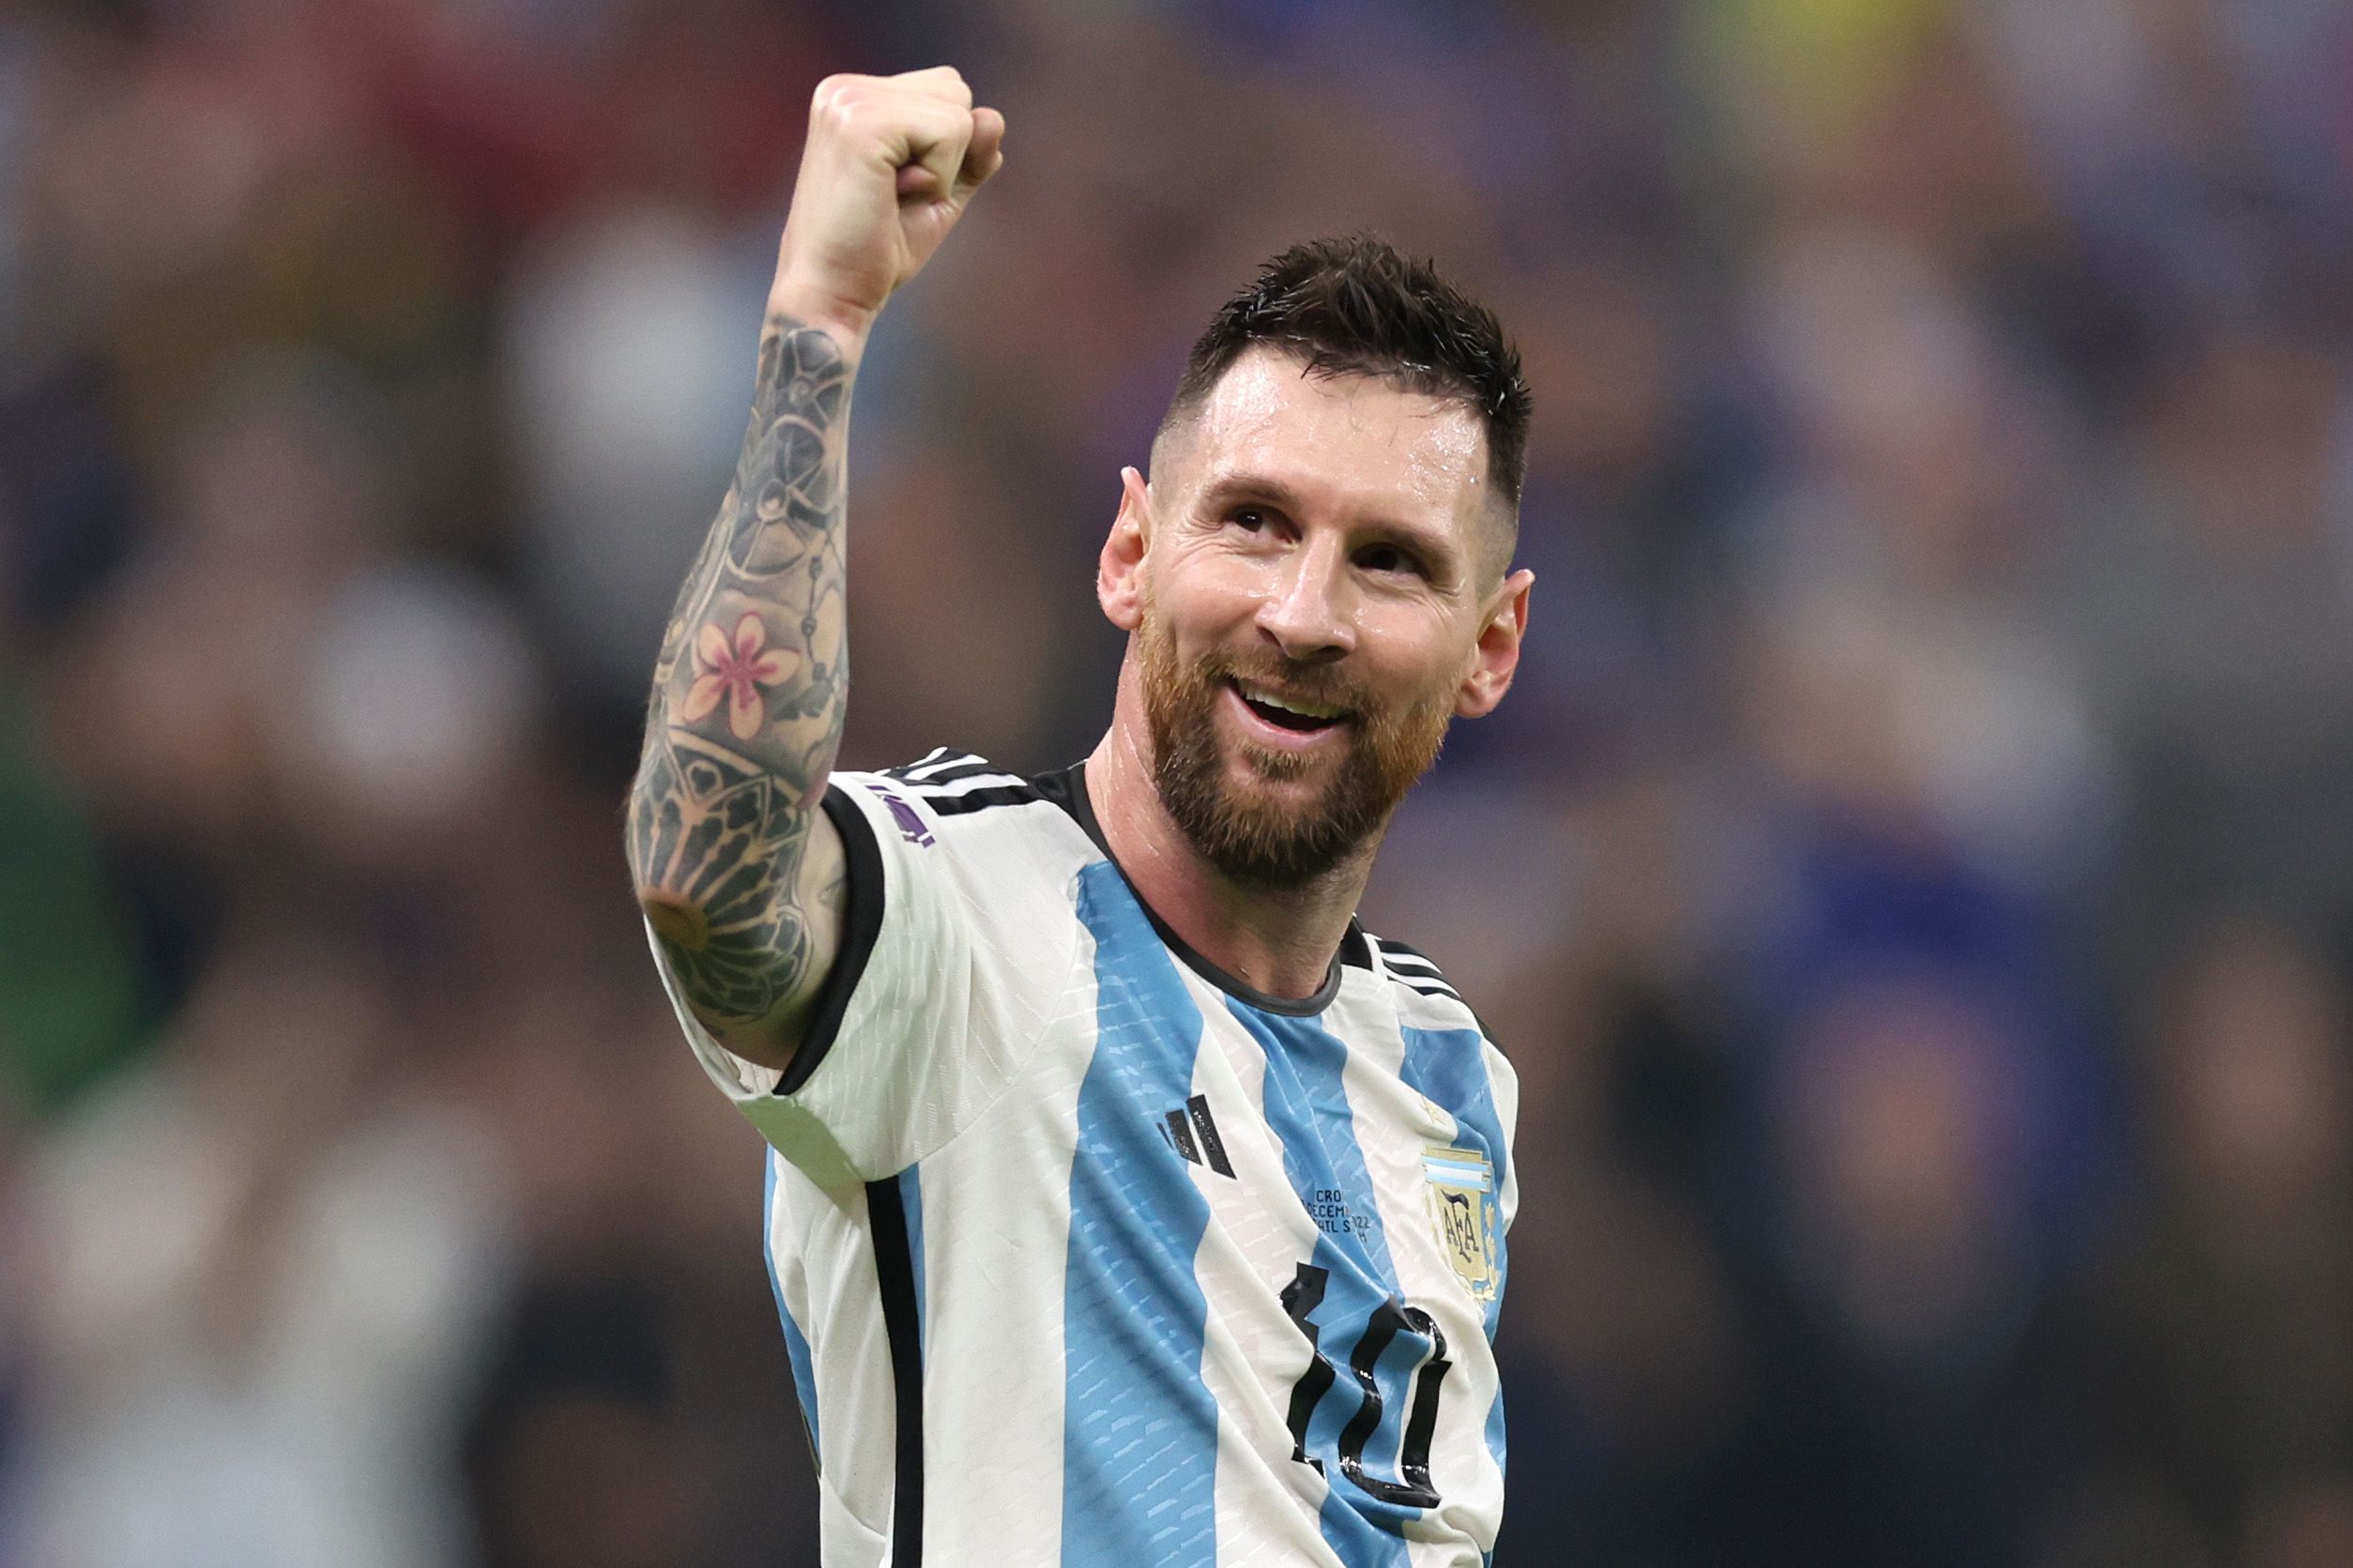 Argentina and Inter Miami forward Lionel Messi has been named Time magazine's Athlete of the Year.